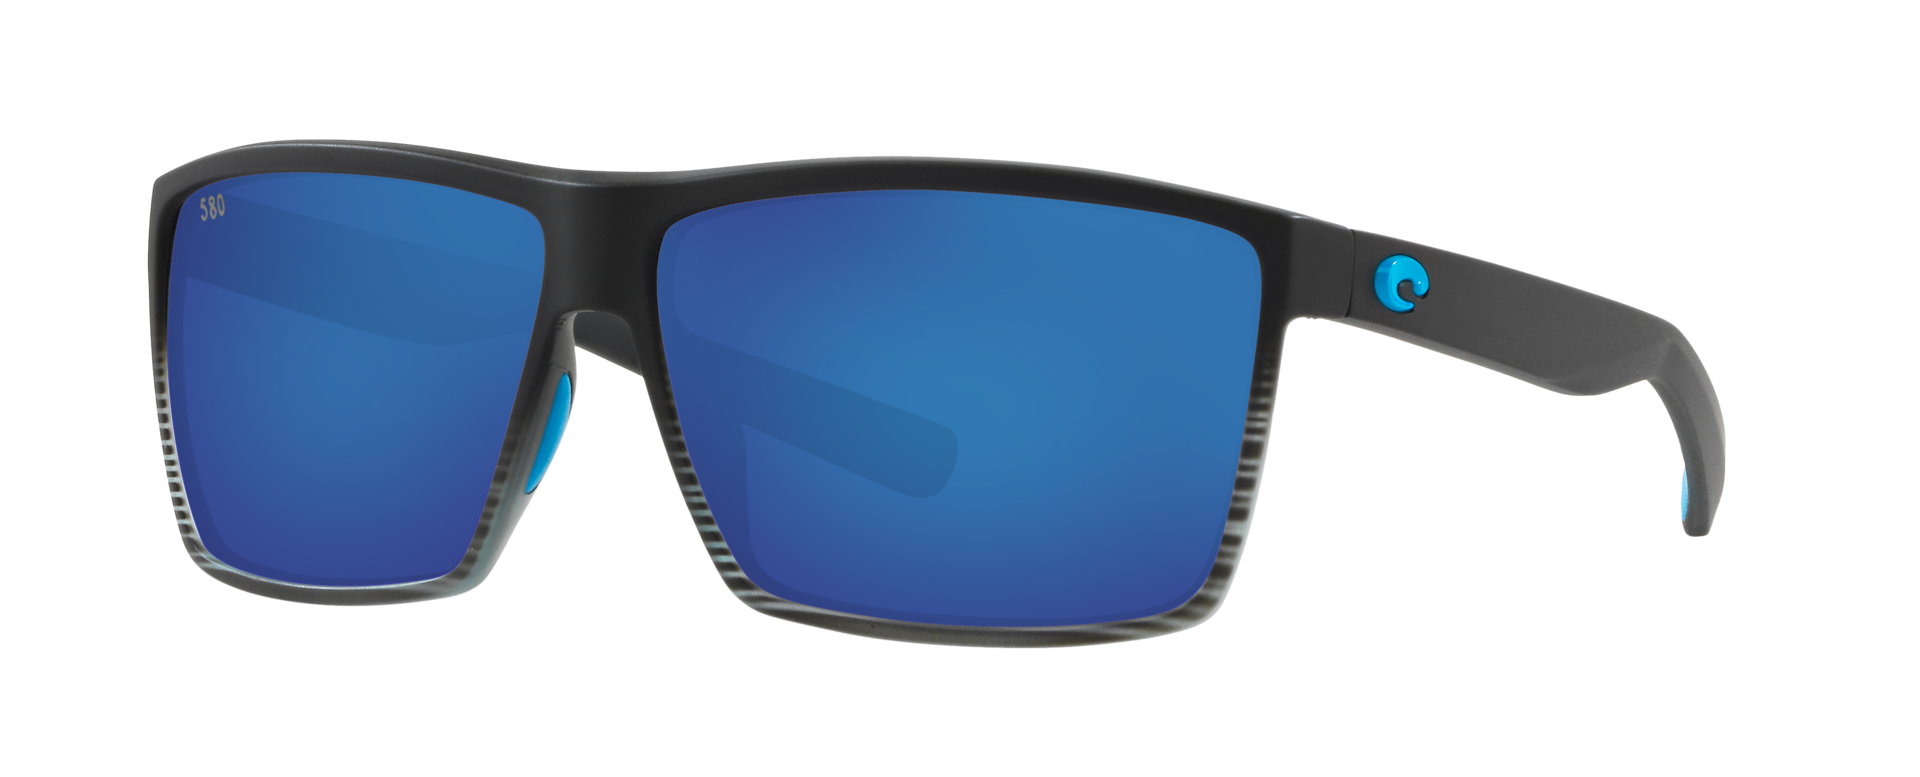 costa rincon polarized sunglasses in black and blue with blue lenses